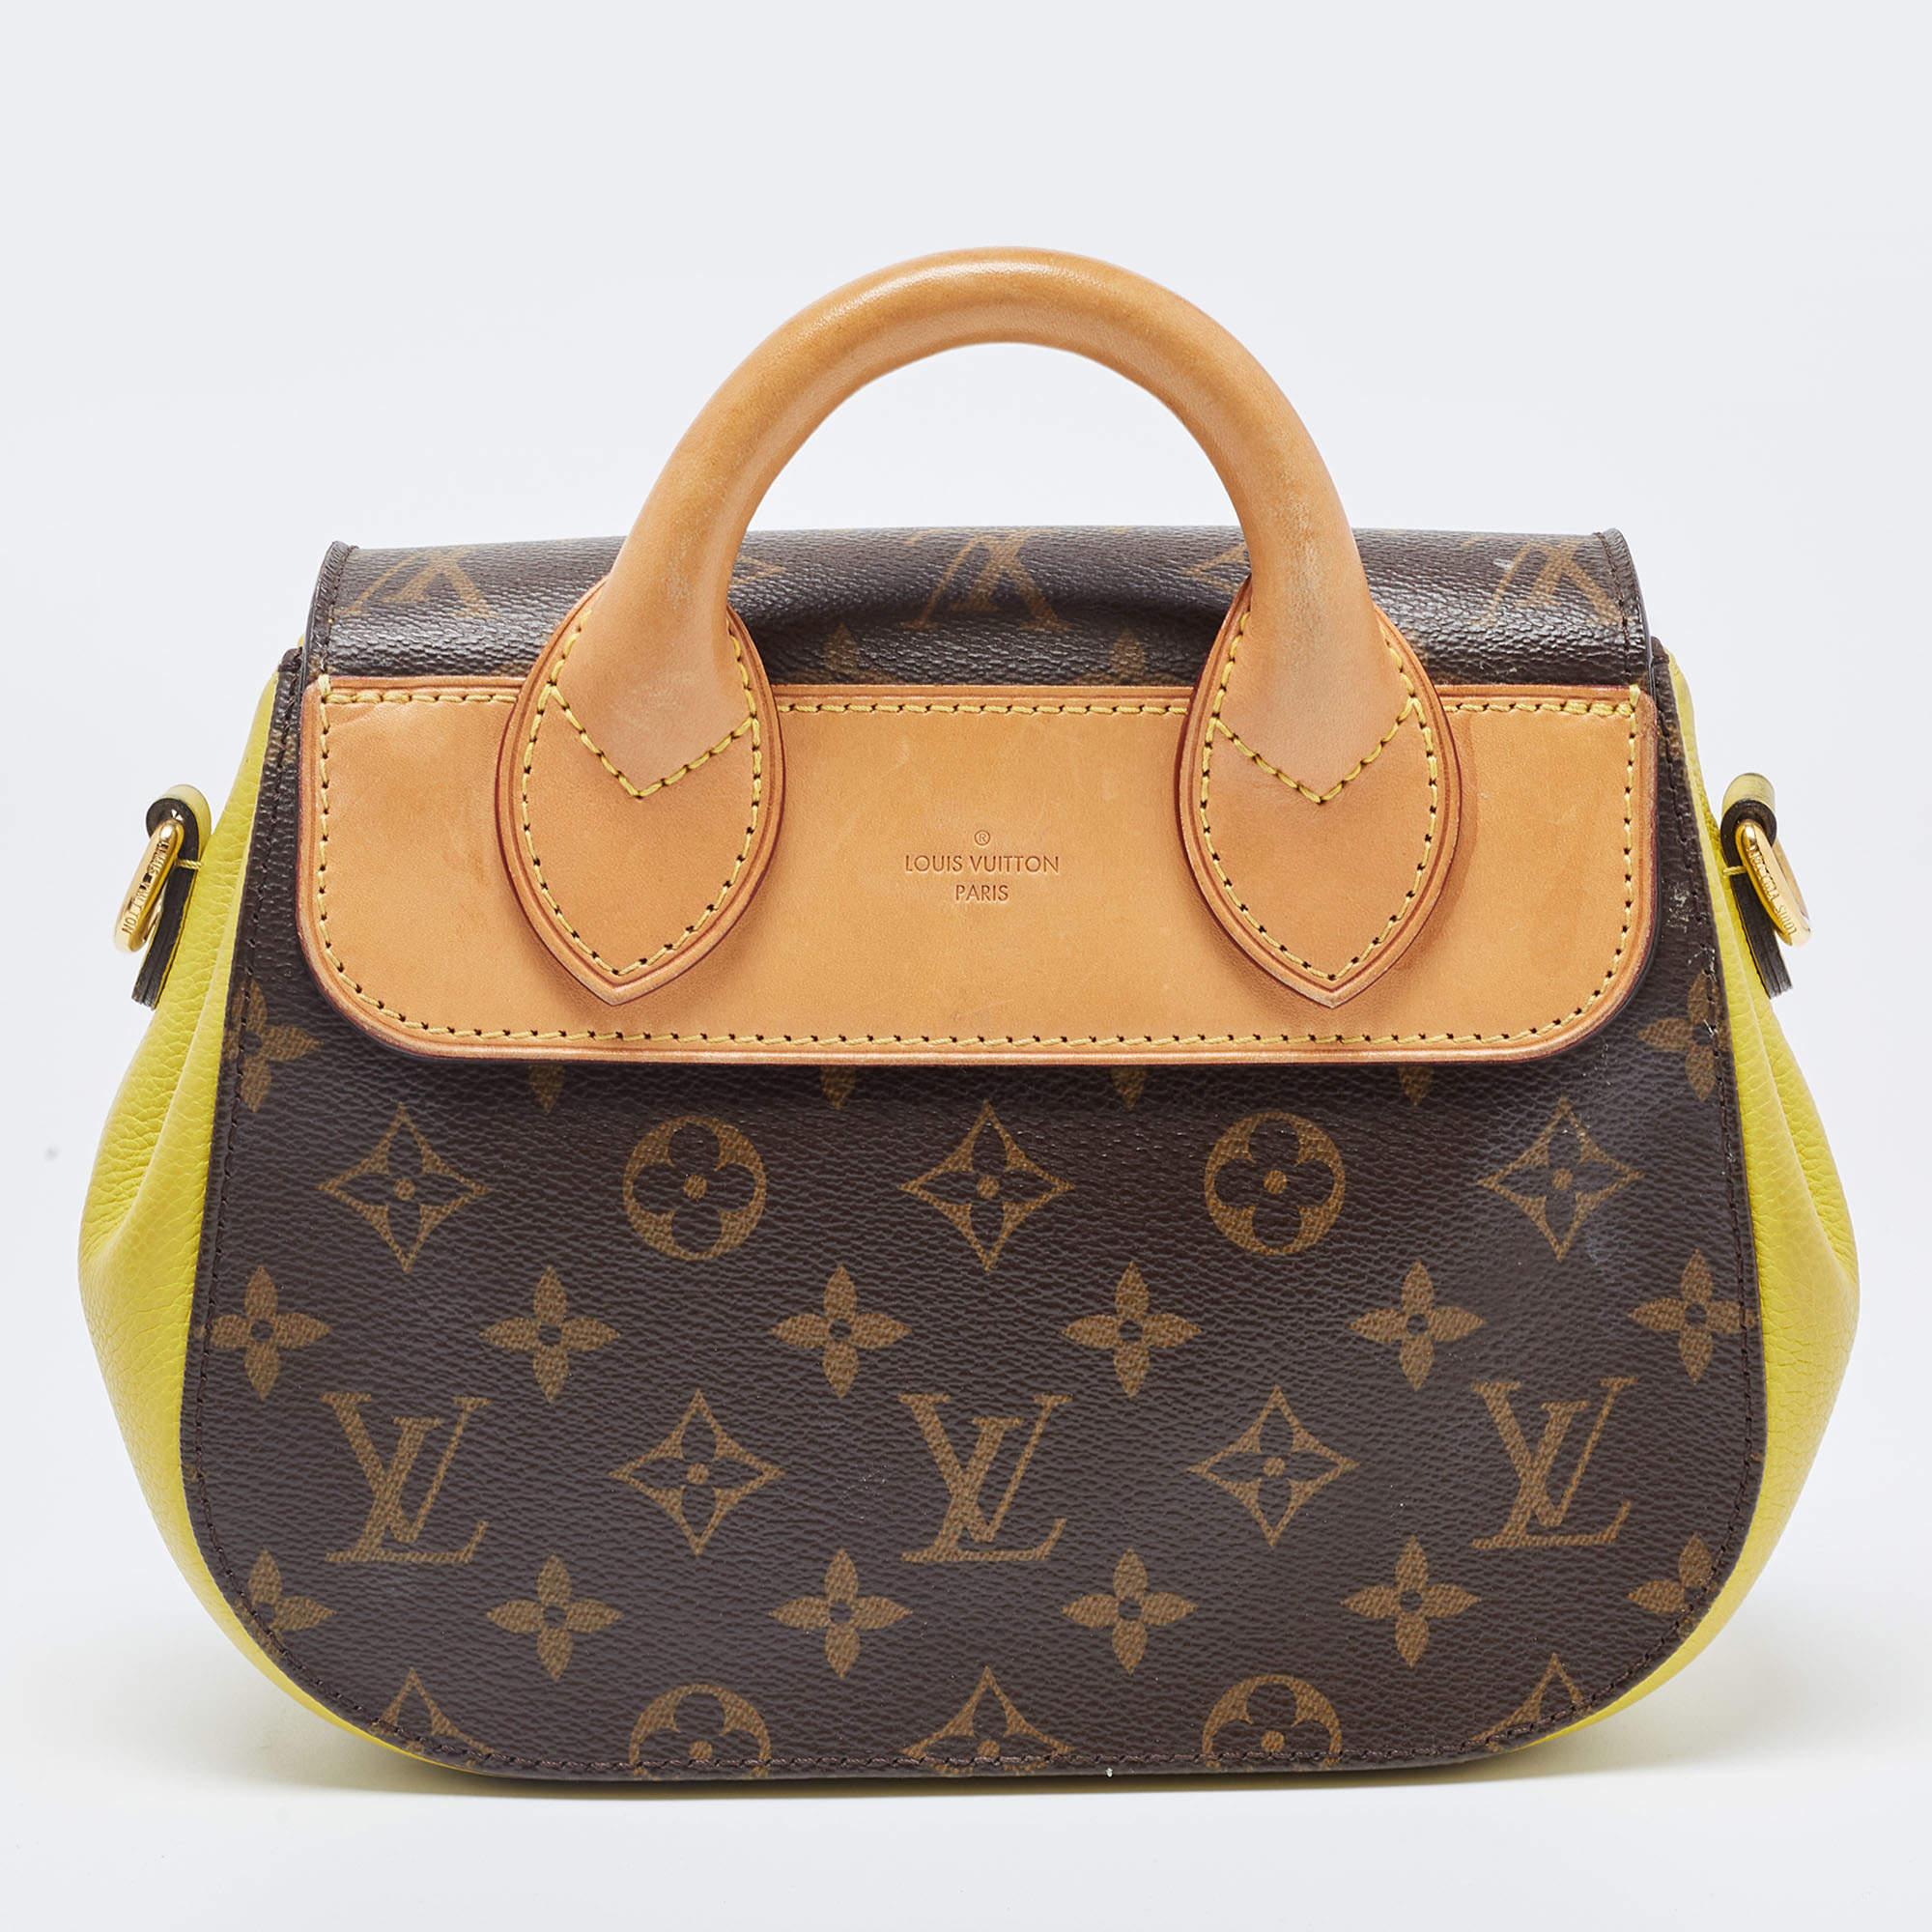 A perfect pick for endless style and fashion-filled sprees is this Eden. This Louis Vuitton creation has been beautifully crafted from Monogram canvas as well as leather and styled with a push lock on the flap. The insides are lined with Alcantara